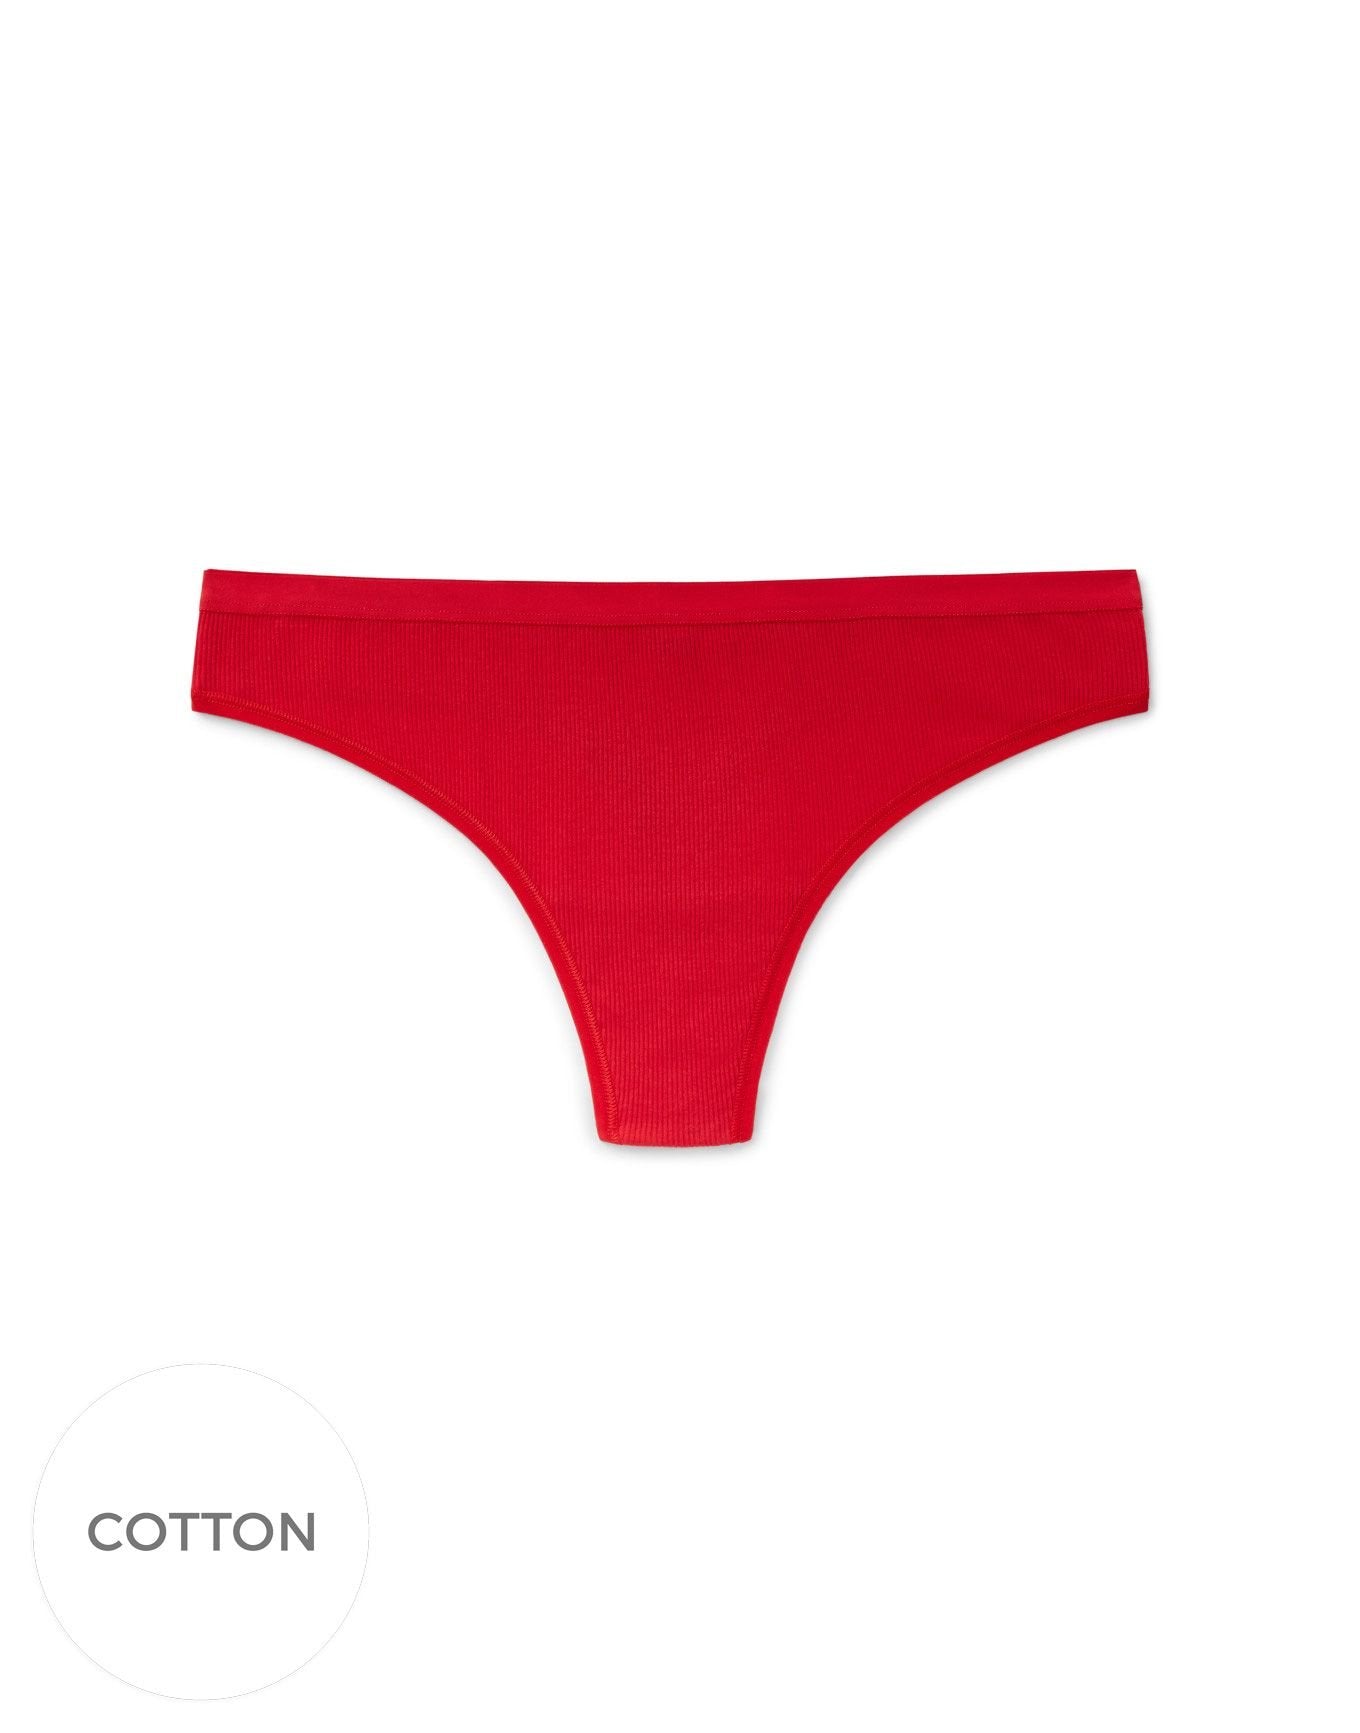 Adore Me Alexandra Ribbed Cotton Thong in color Red Pepper 3ET8 and shape thong